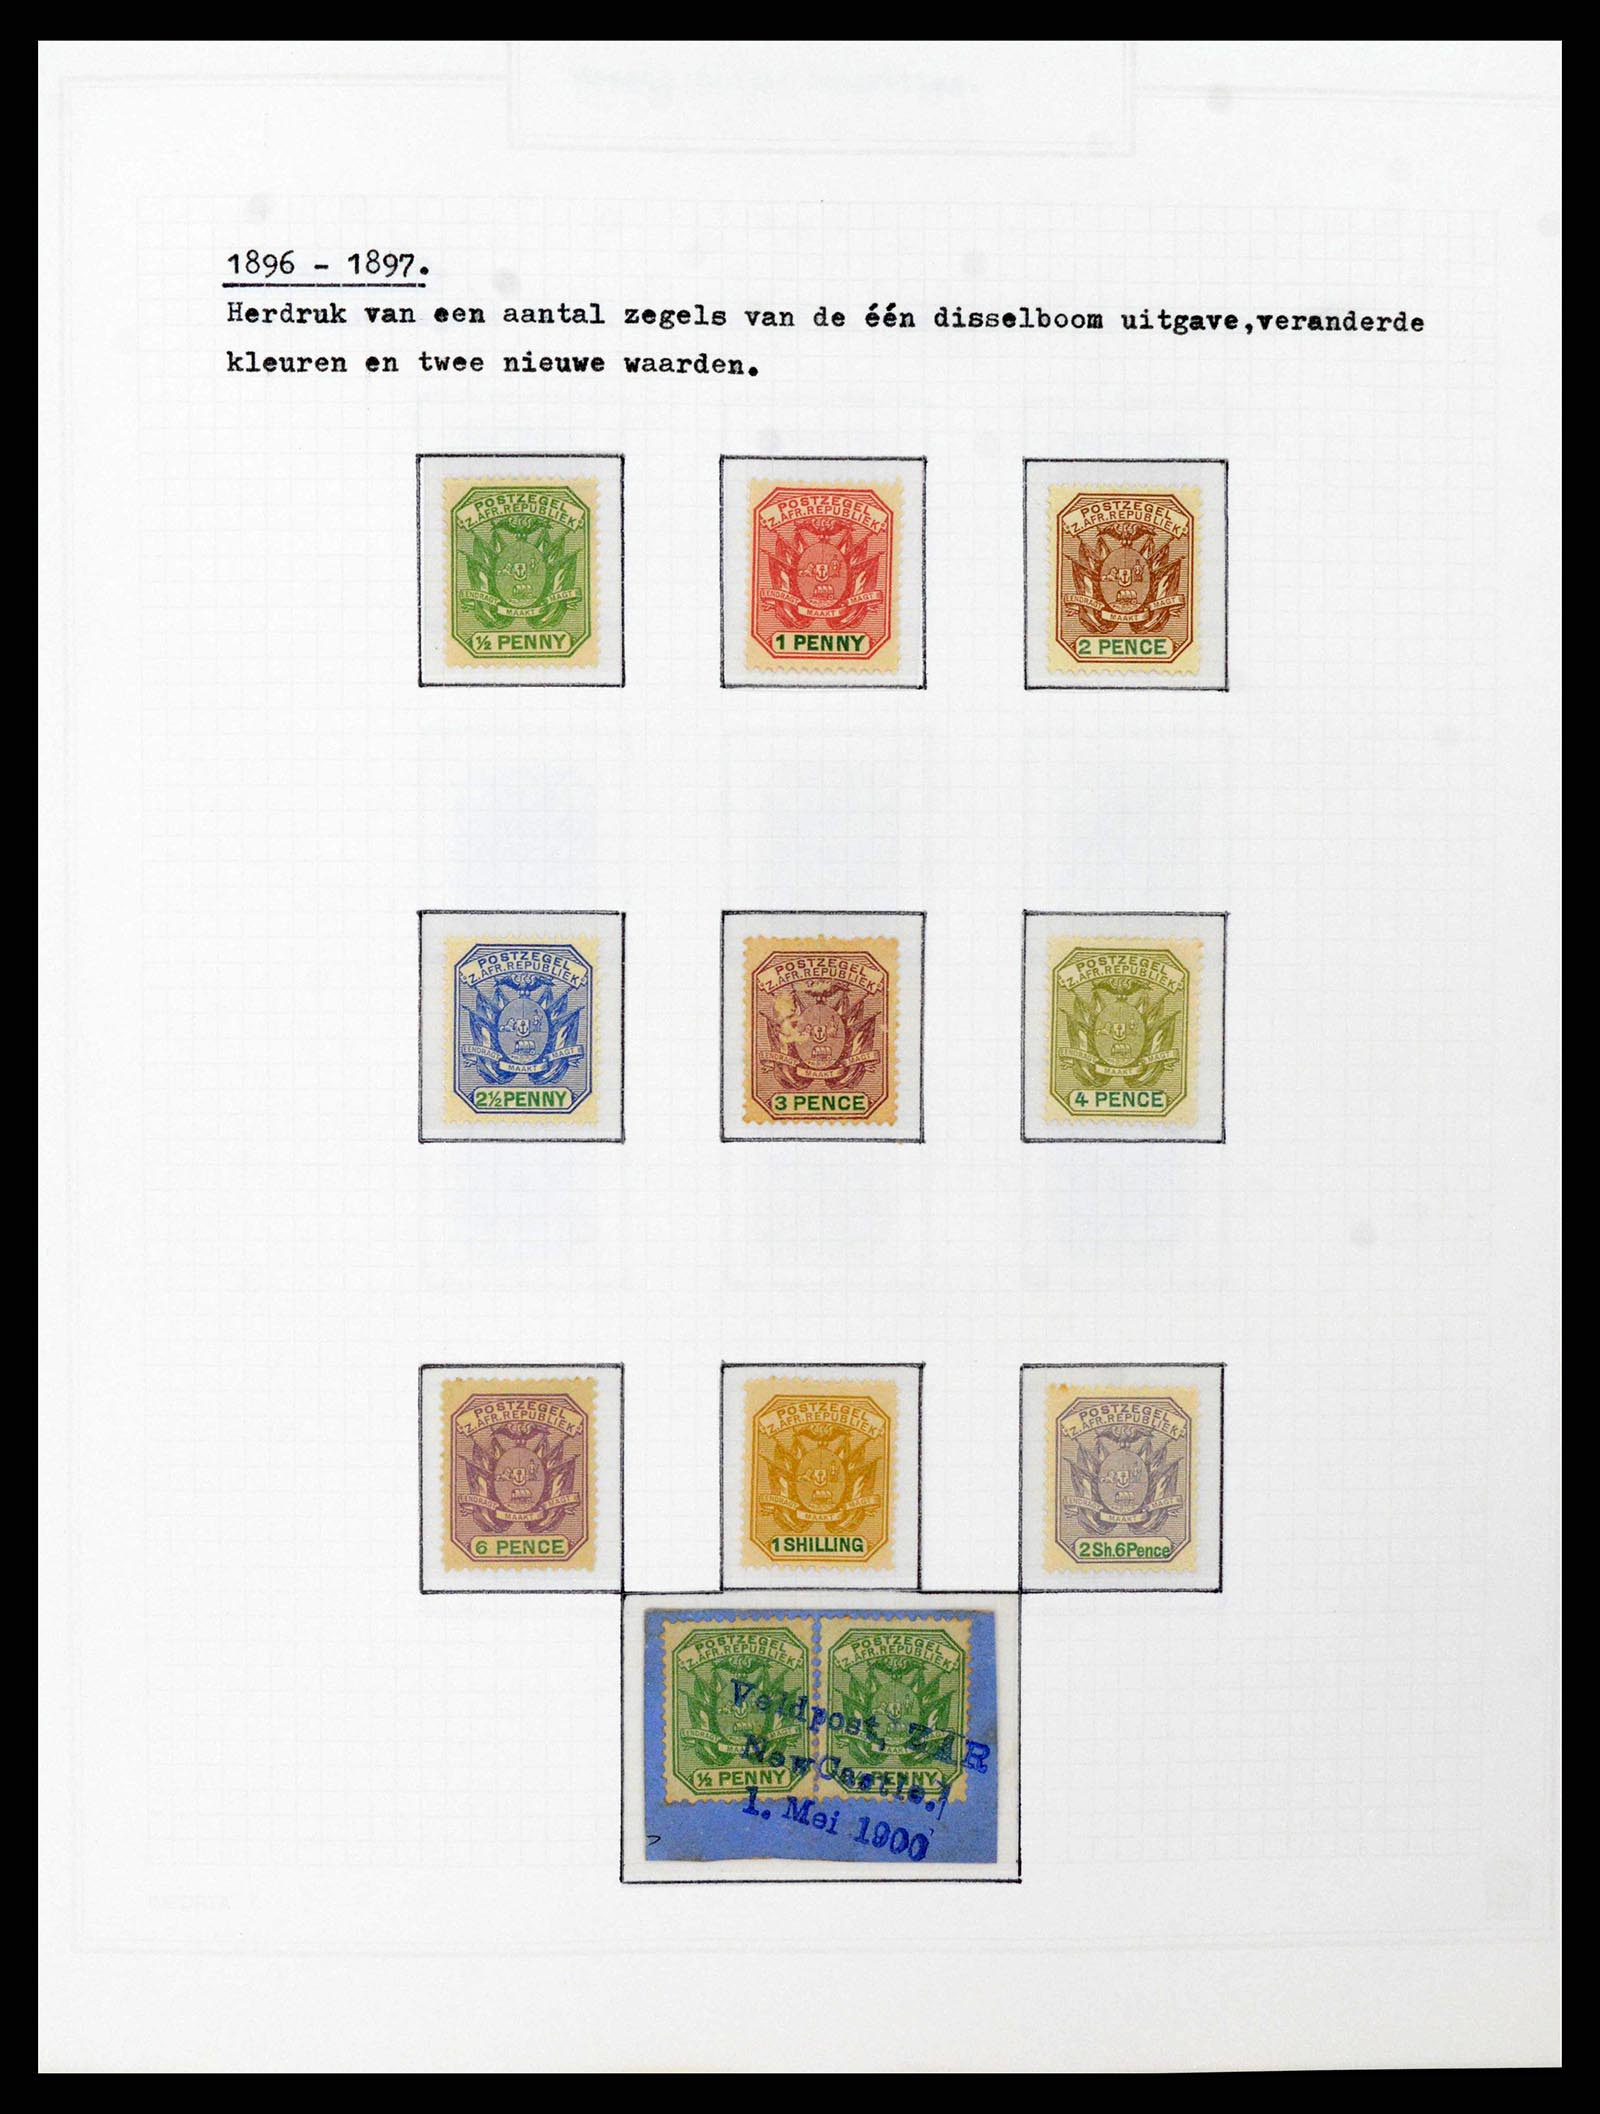 38050 0076 - Stamp collection 38050 South Africa and territories 1855-2008.